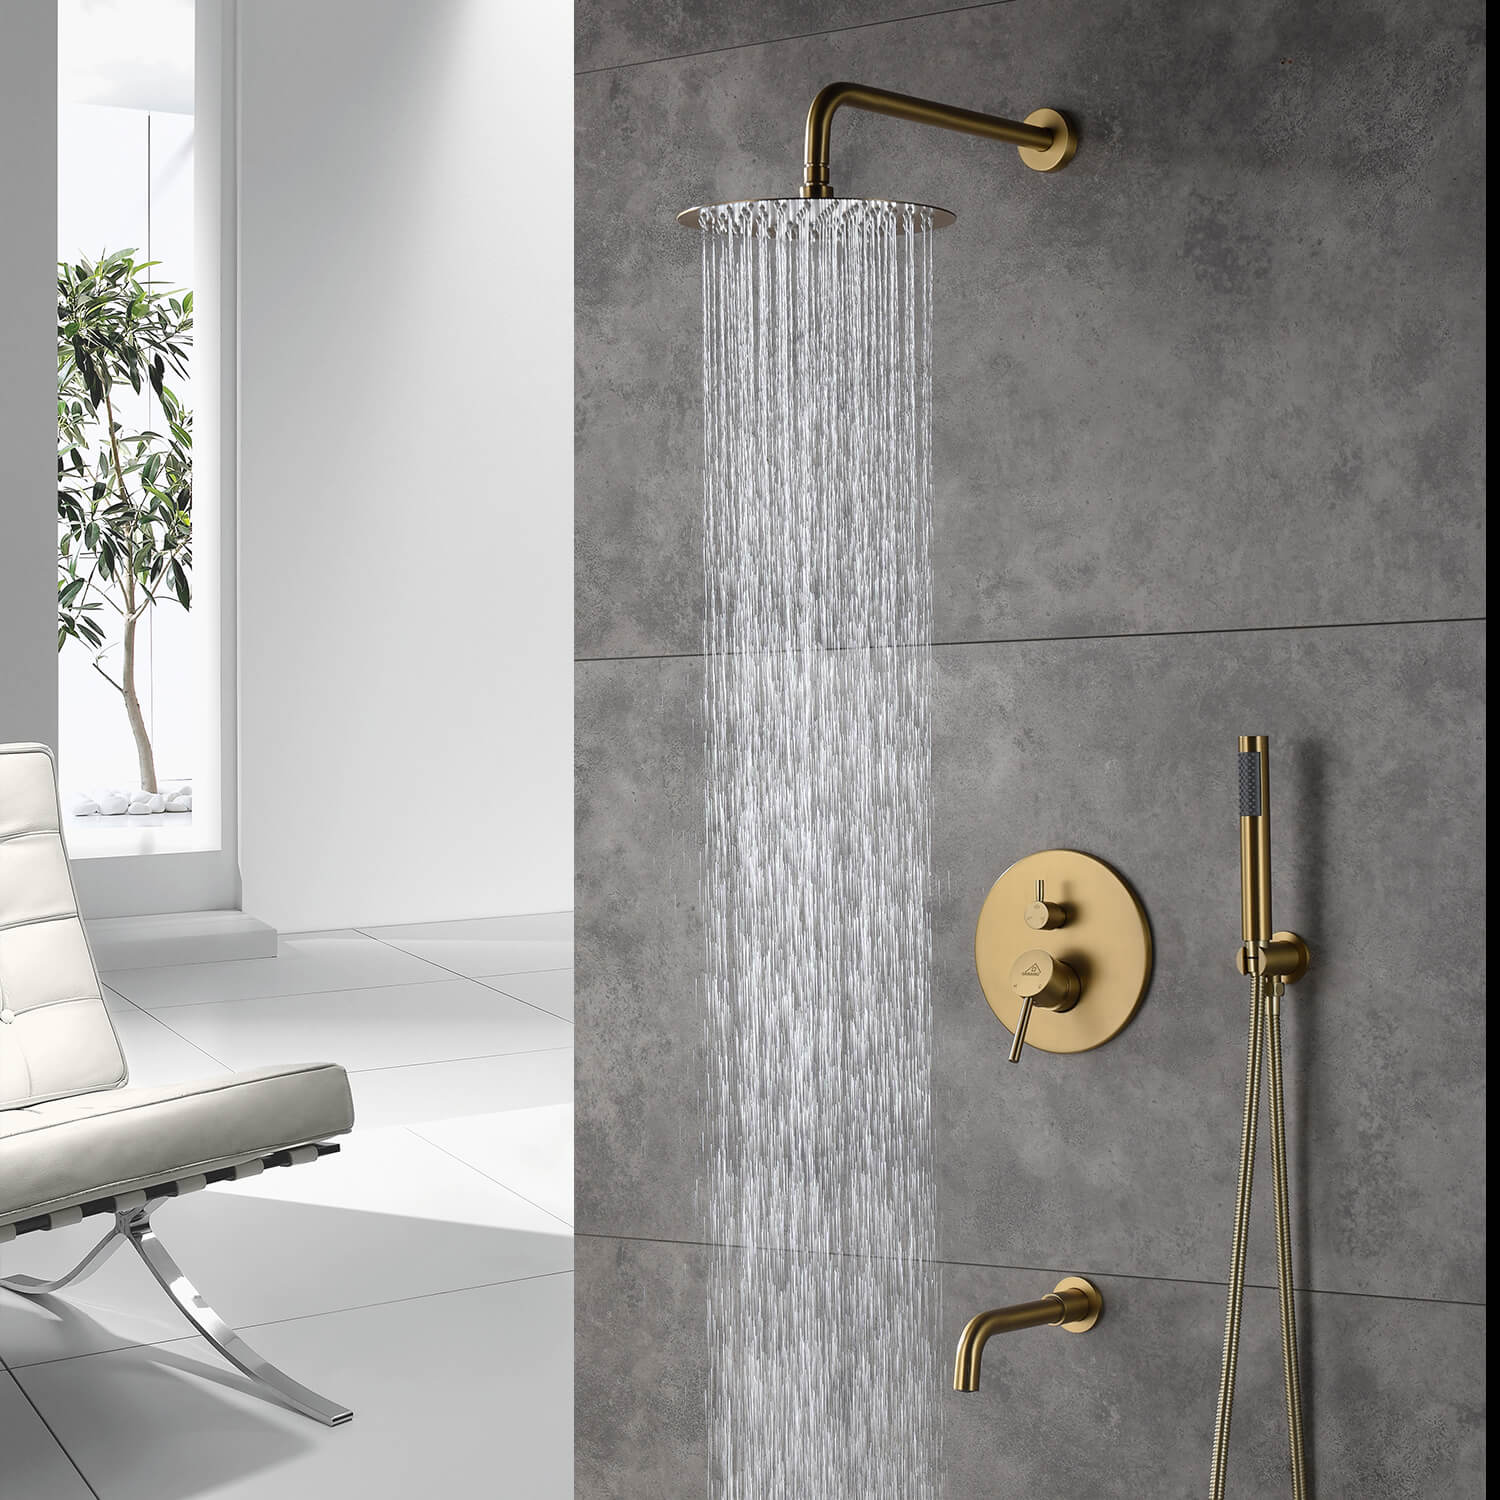 https://img-va.myshopline.com/image/store/2000019301/1616580841581/Casainc-10-inch-Round-3-Functions-Wall-Mount-Dual-Shower-Heads-Shower-System-in-Brushed-Gold-(1).jpeg?w=1500&h=1500